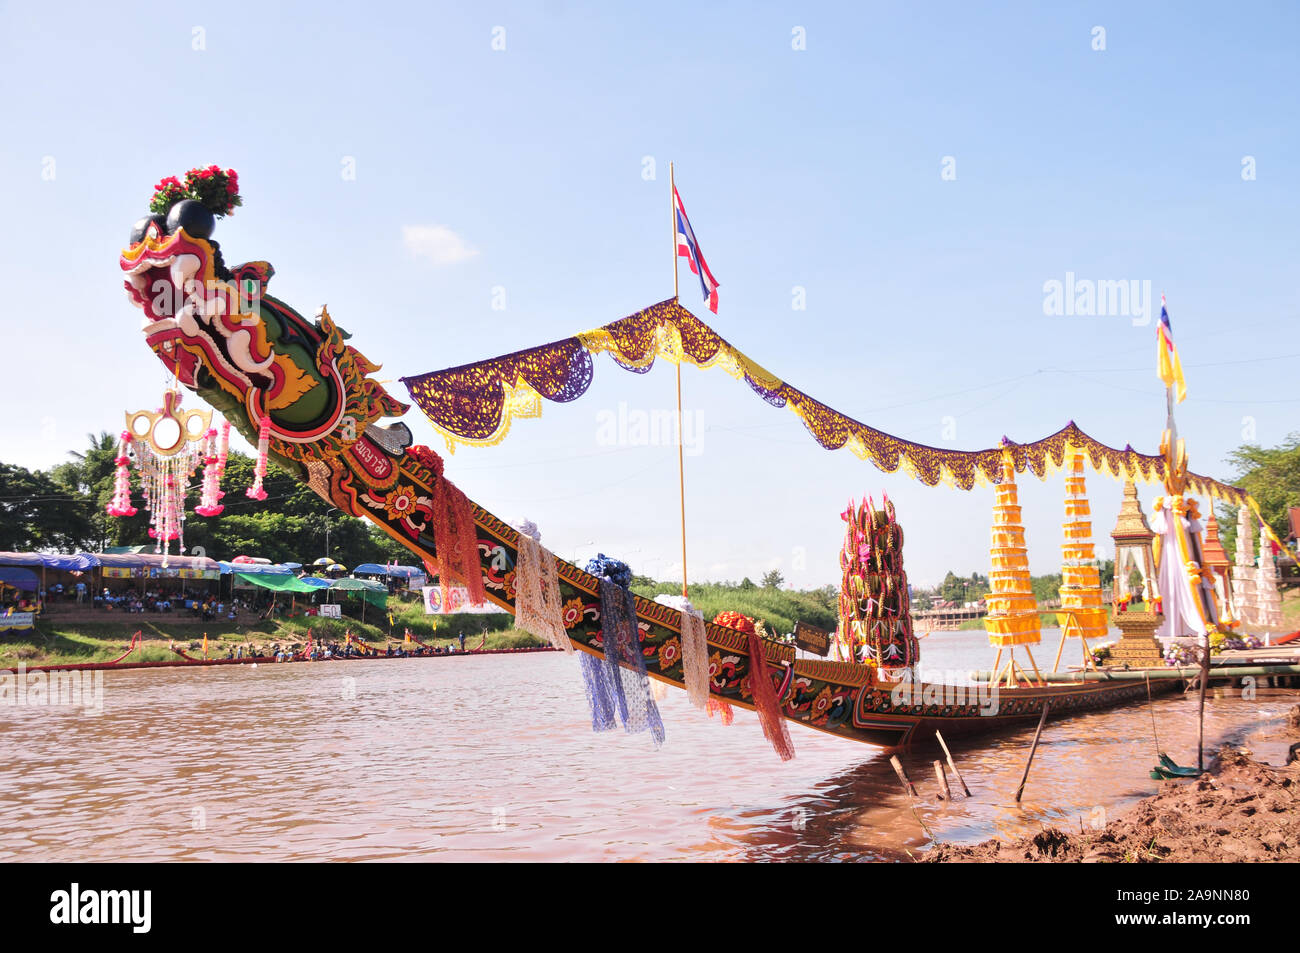 Nan, Thailand – October 27,2019 : King of Naga long boat racing festival, the long boats used during the Nan River races at the end of Buddhist Lent O Stock Photo